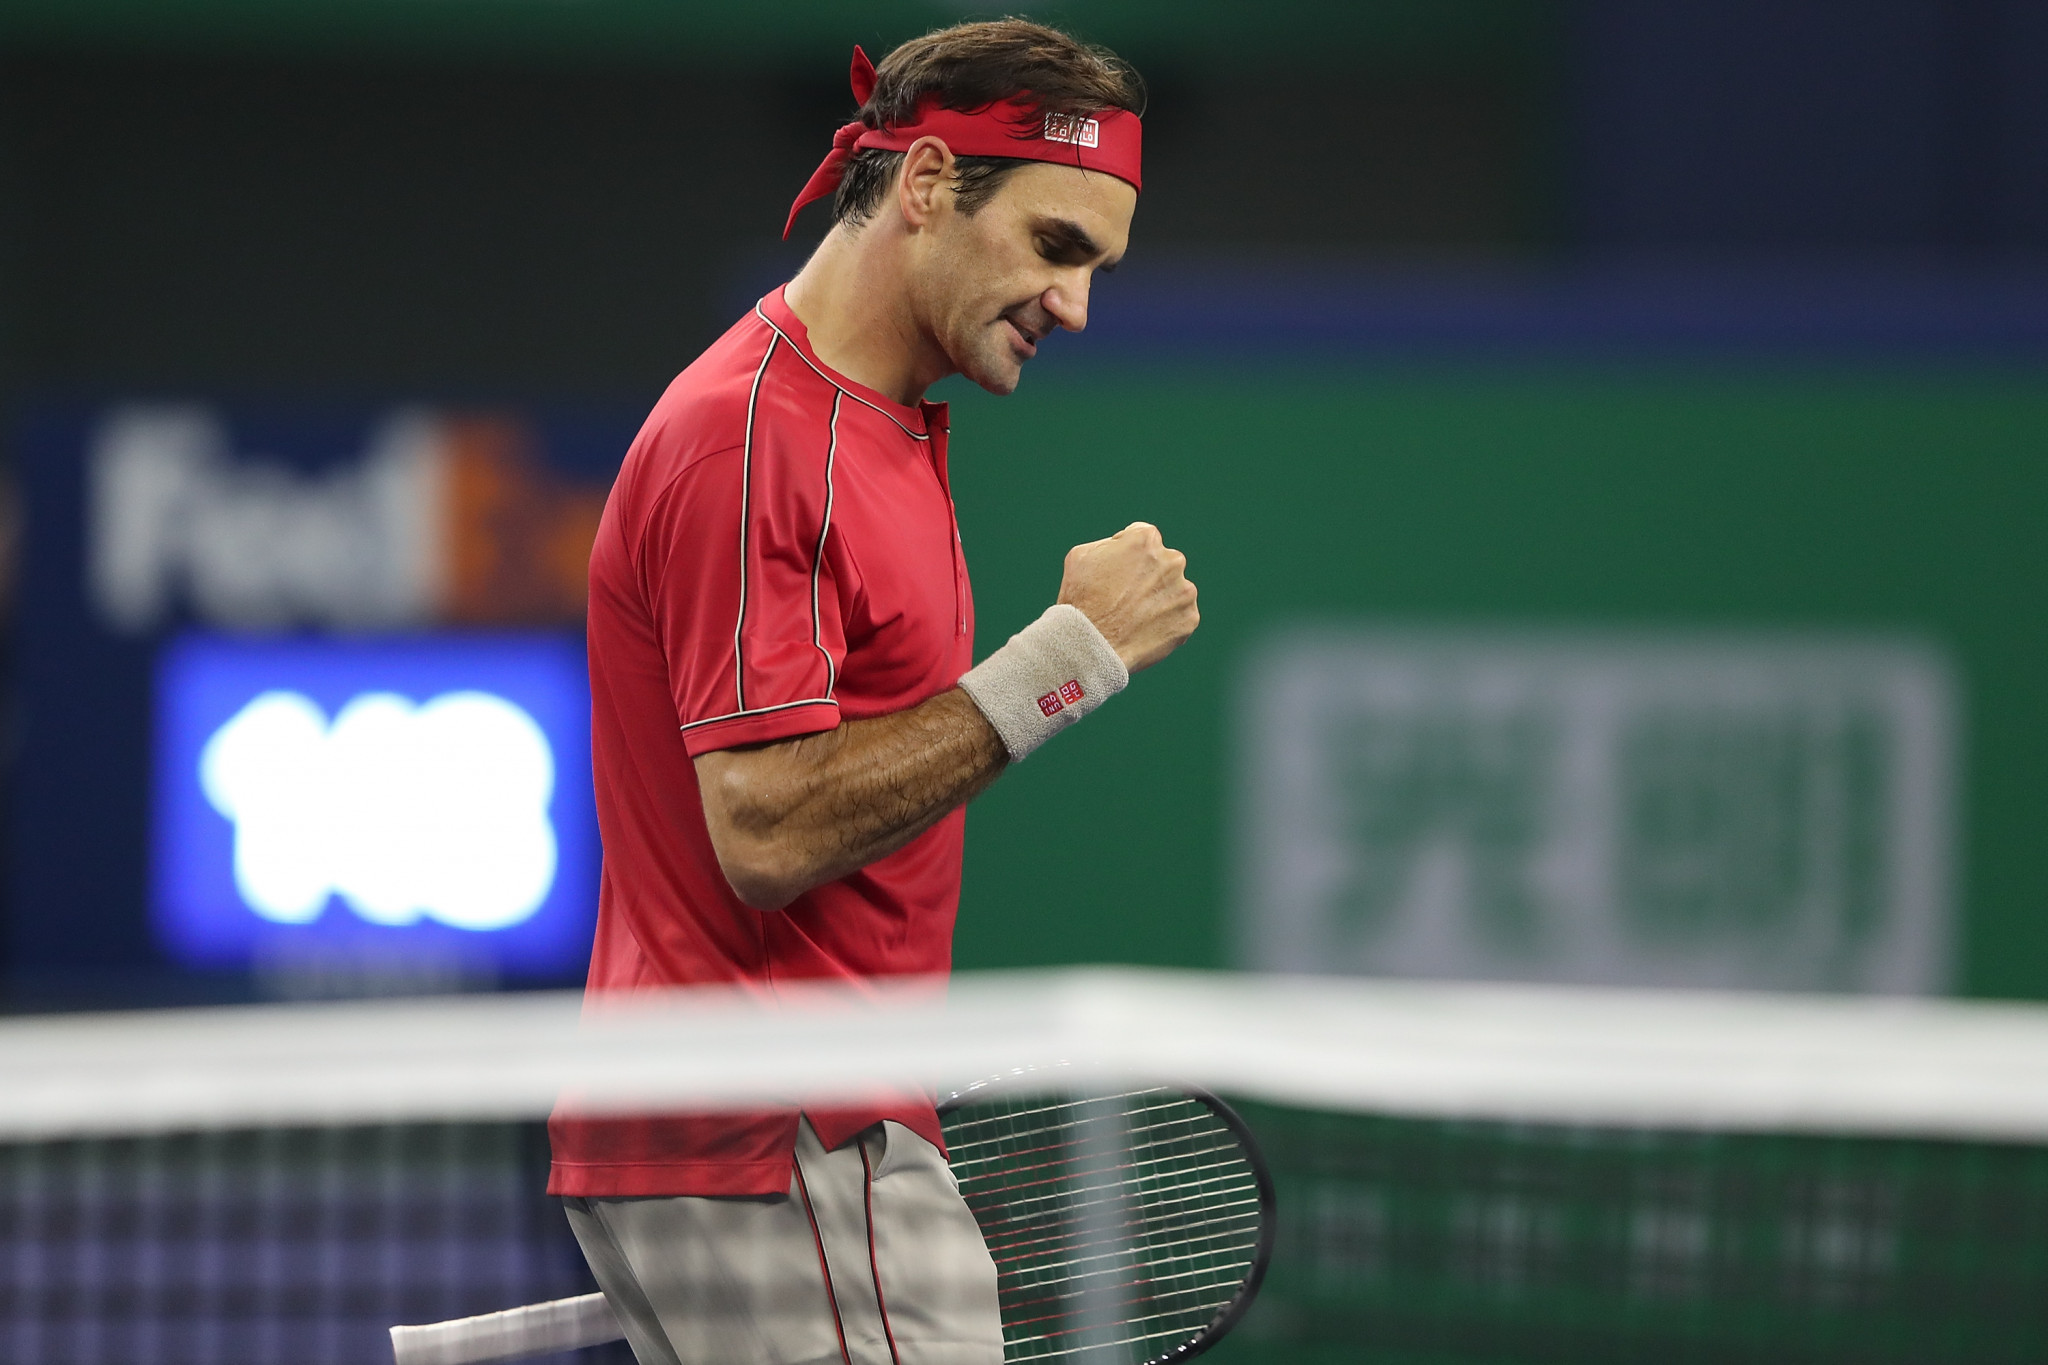 Roger Federer is safely through to round three of the Shanghai Masters ©Getty Images